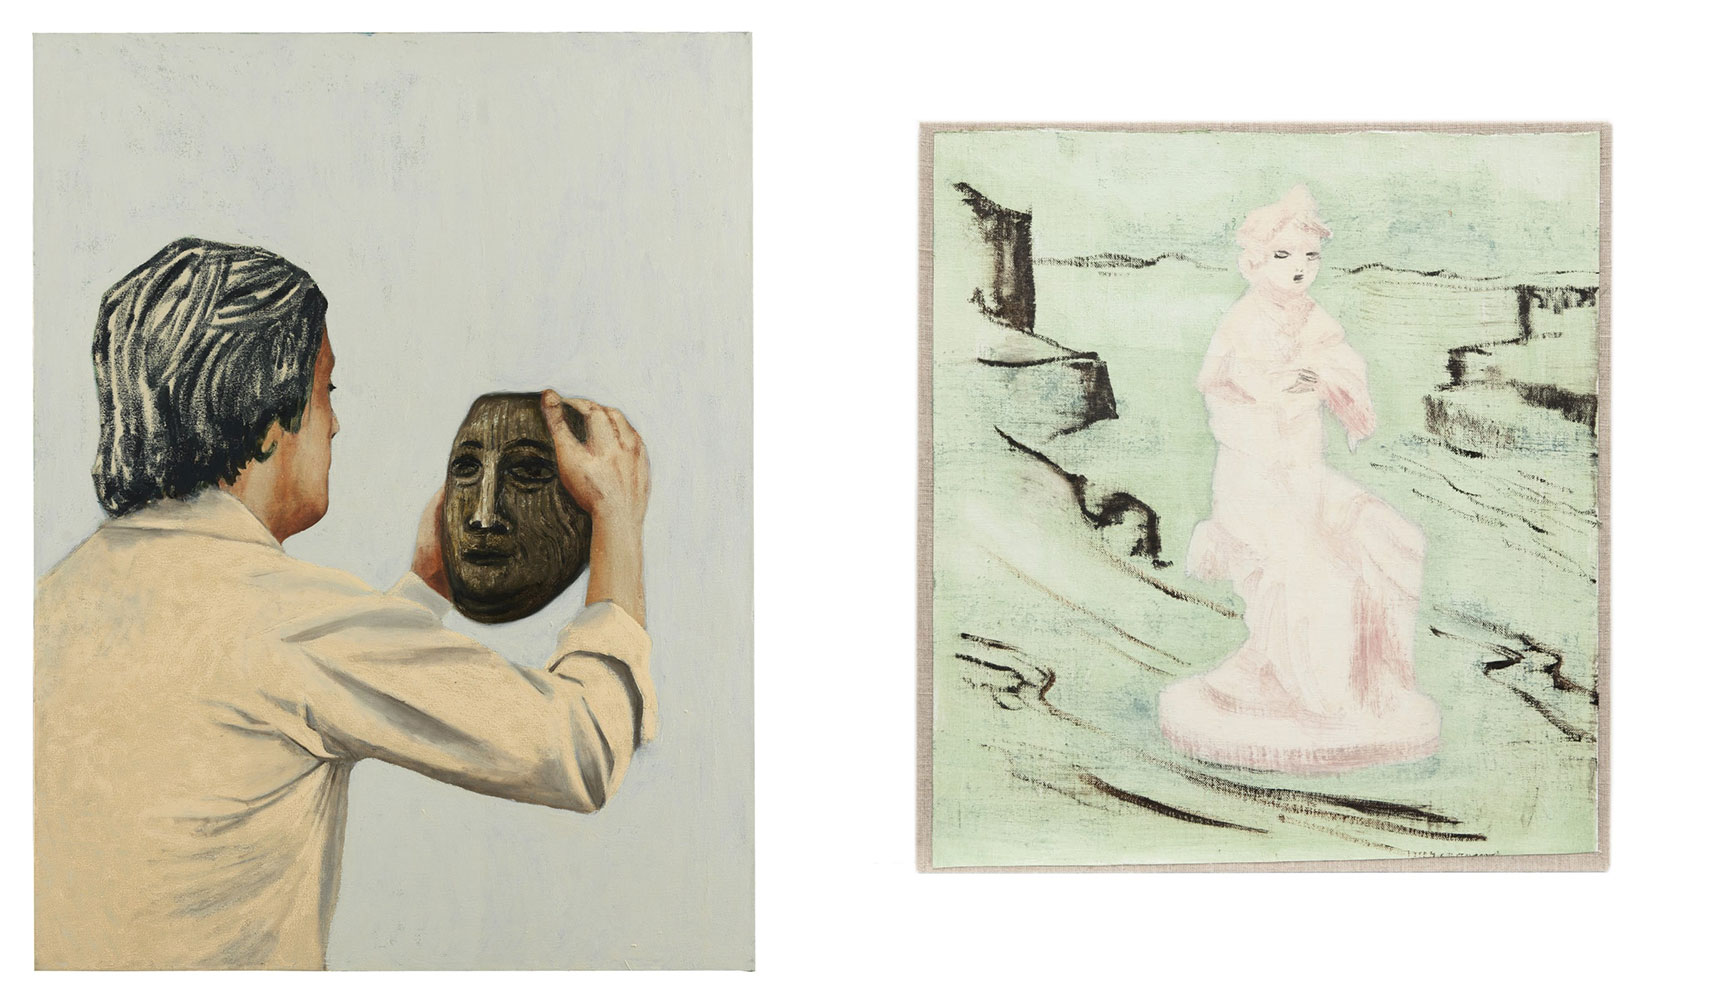 Left: Mamma Andersson, Fadern / The Father, 2021, Oil and acrylic on canvas, 105x80 cm, © Mamma Andersson, Courtesy the artist and Galleri Magnus KarlssonRight: Mamma Andersson, Floden / The Stream, 2022, Oil on canvas, 41x37,5 cm, © Mamma Andersson, Courtesy the artist and Galleri Magnus Karlsson 